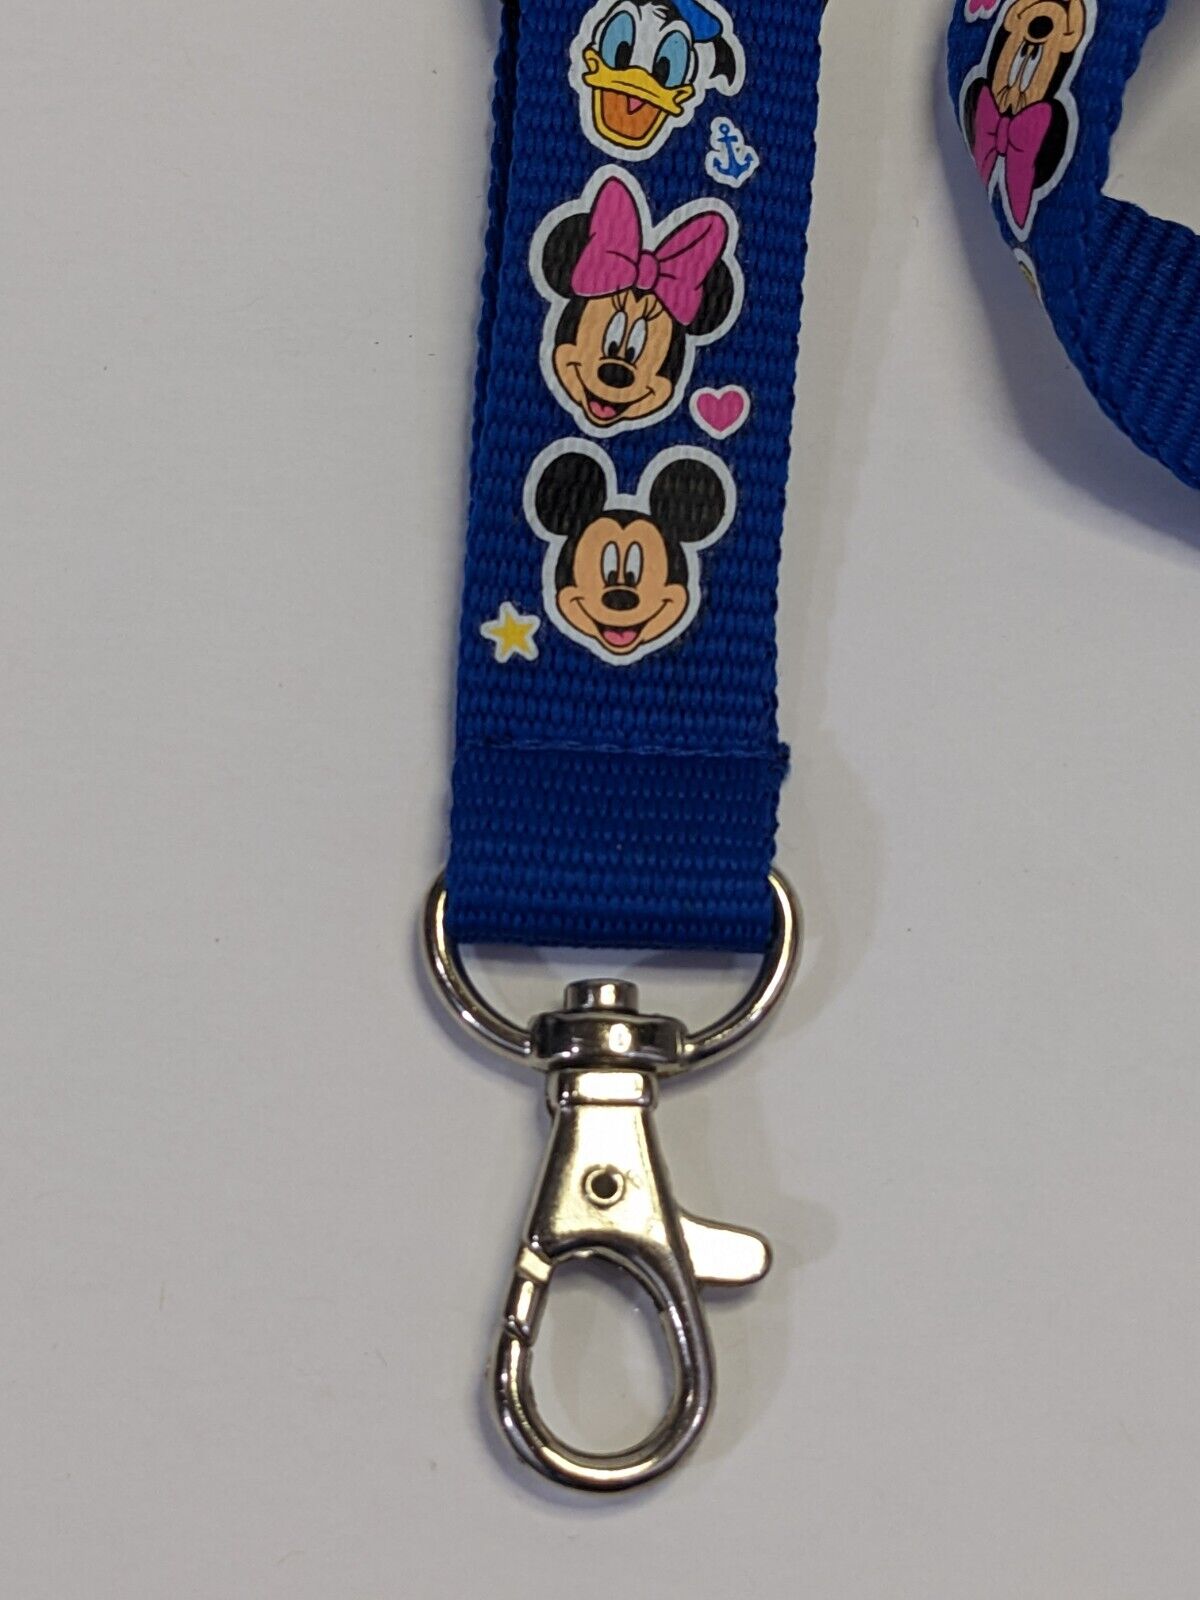 Disney Mickey & Gang ID Lace Lanyard Minnie Mouse Pluto Unisex Collectible